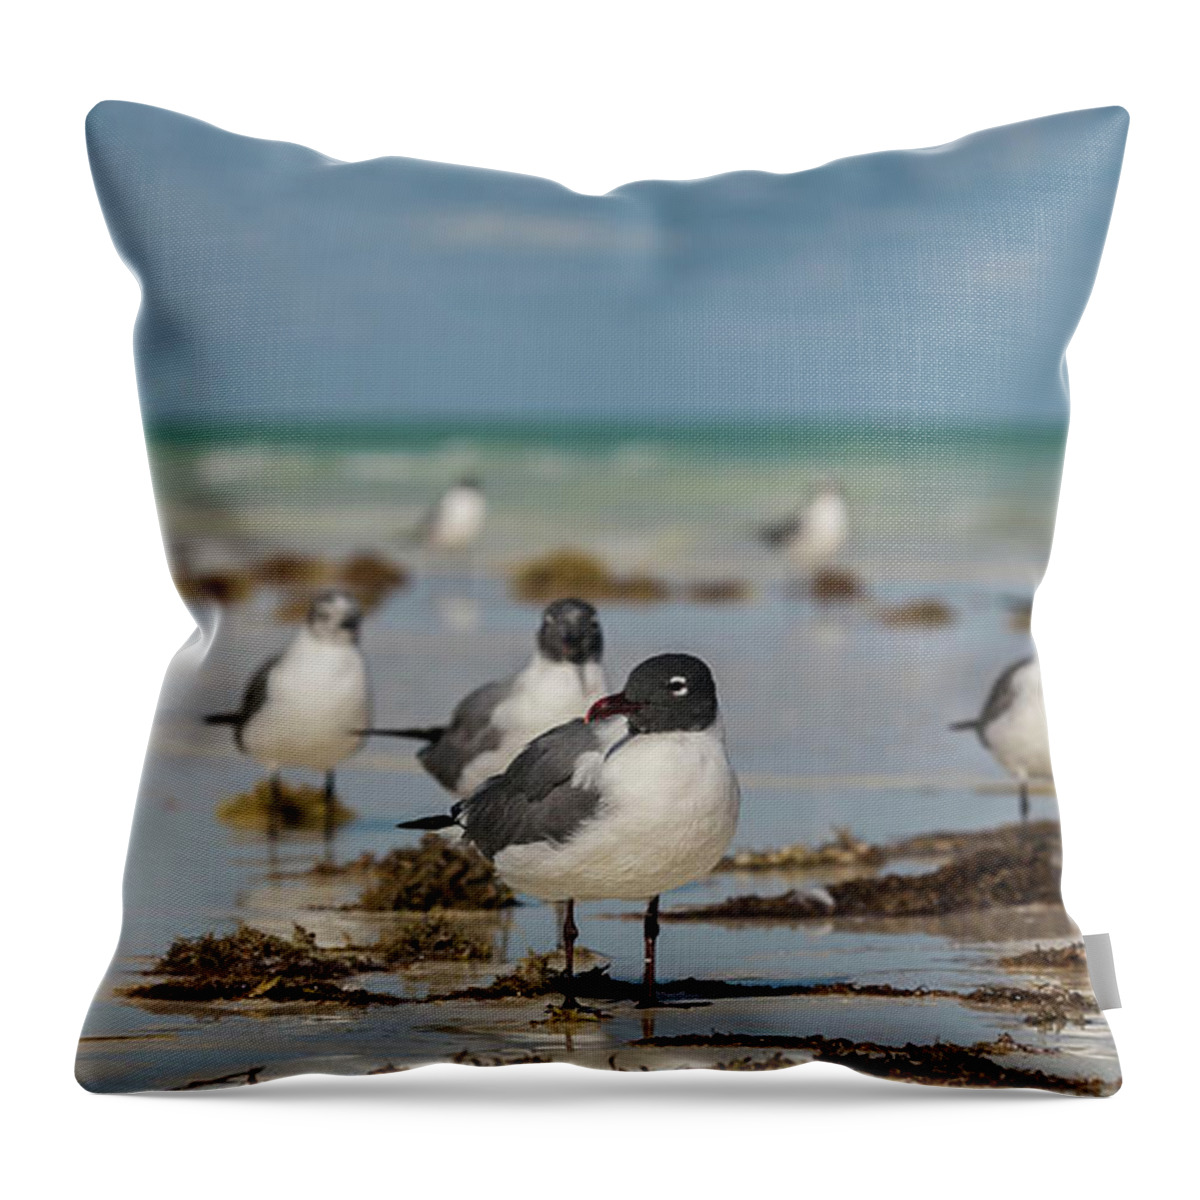 Seagull Throw Pillow featuring the photograph Seagull at Holbox, Mexico by Julieta Belmont